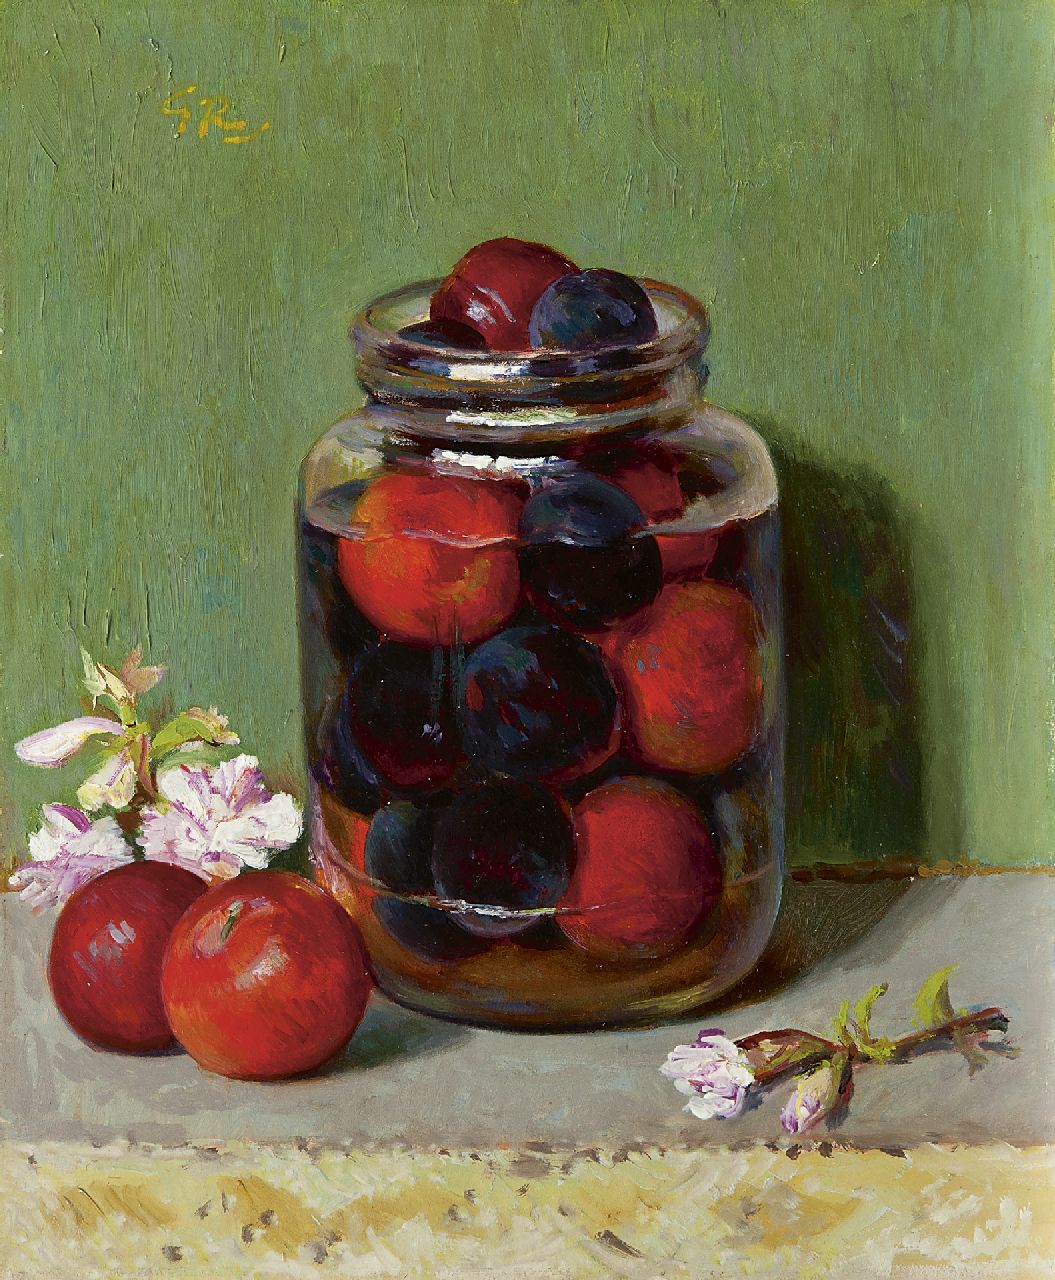 Röling G.V.A.  | Gerard Victor Alphons 'Gé' Röling, Plums in a pot, oil on board 30.1 x 25.0 cm, signed u.l. with initials and in full on the reverse